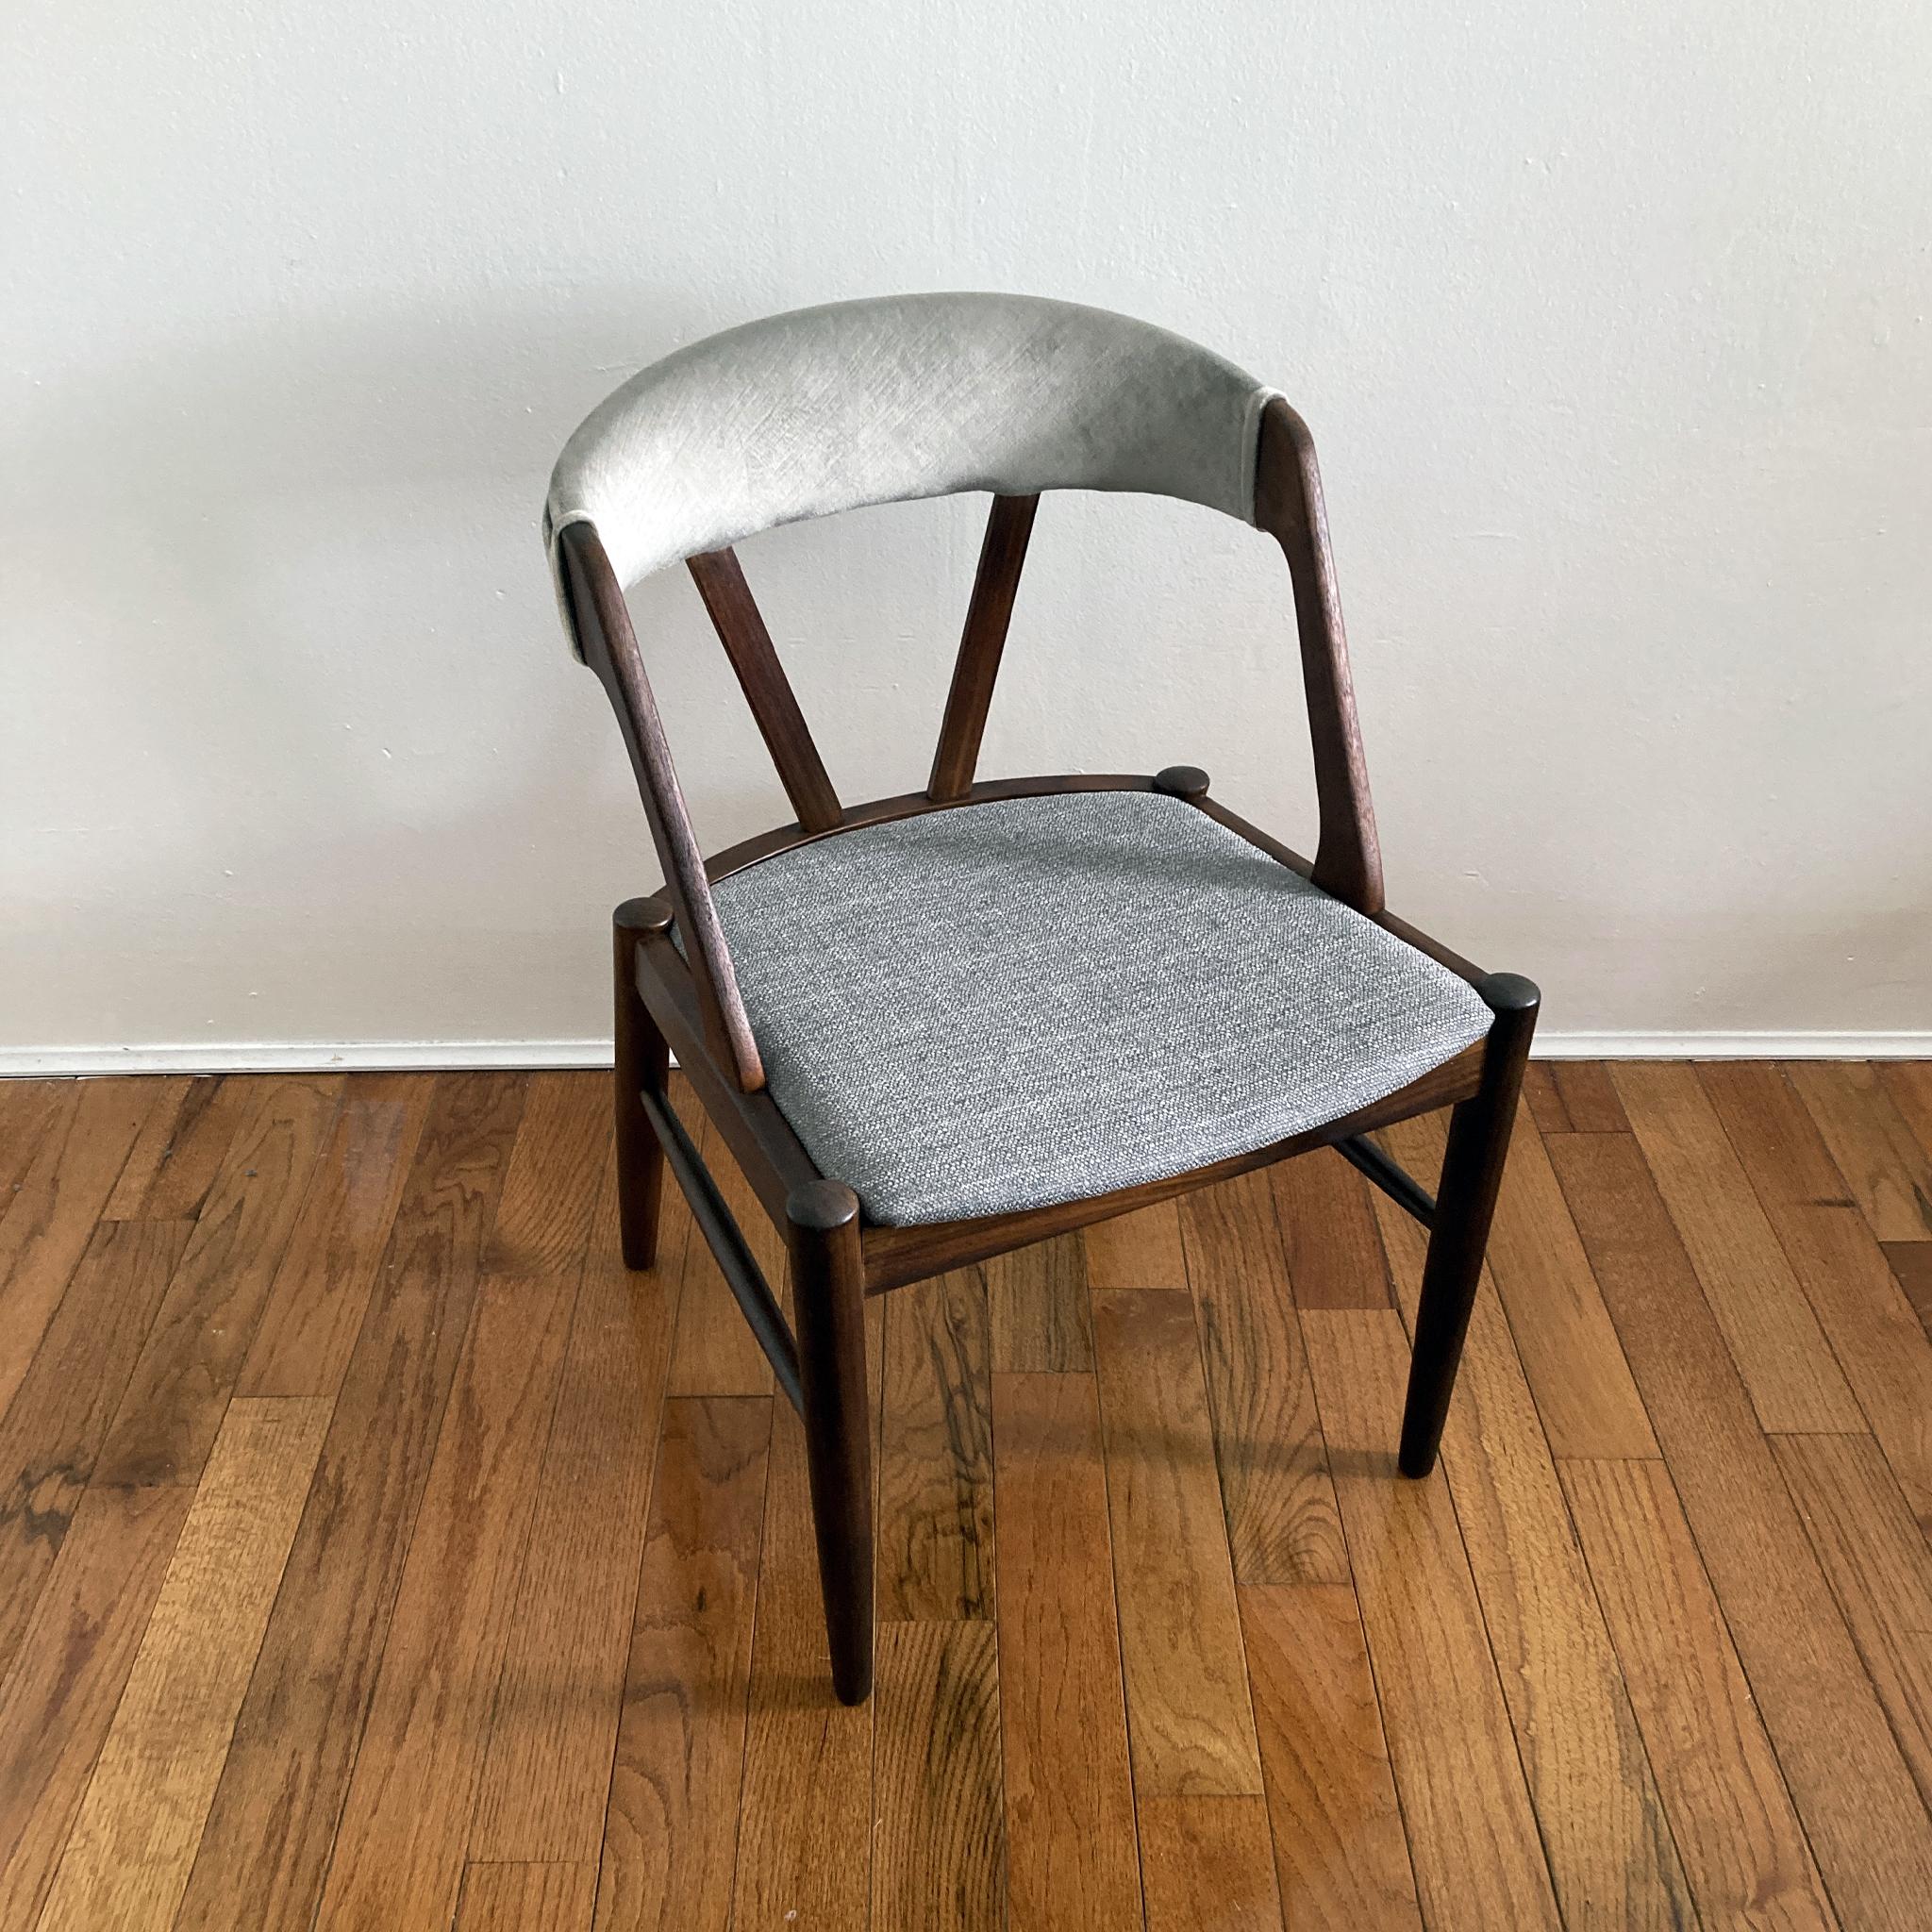 Fabric Kai Kristiansen Style Reupholstered Curved Back Gray Teak Chair, Danish, 1960s For Sale